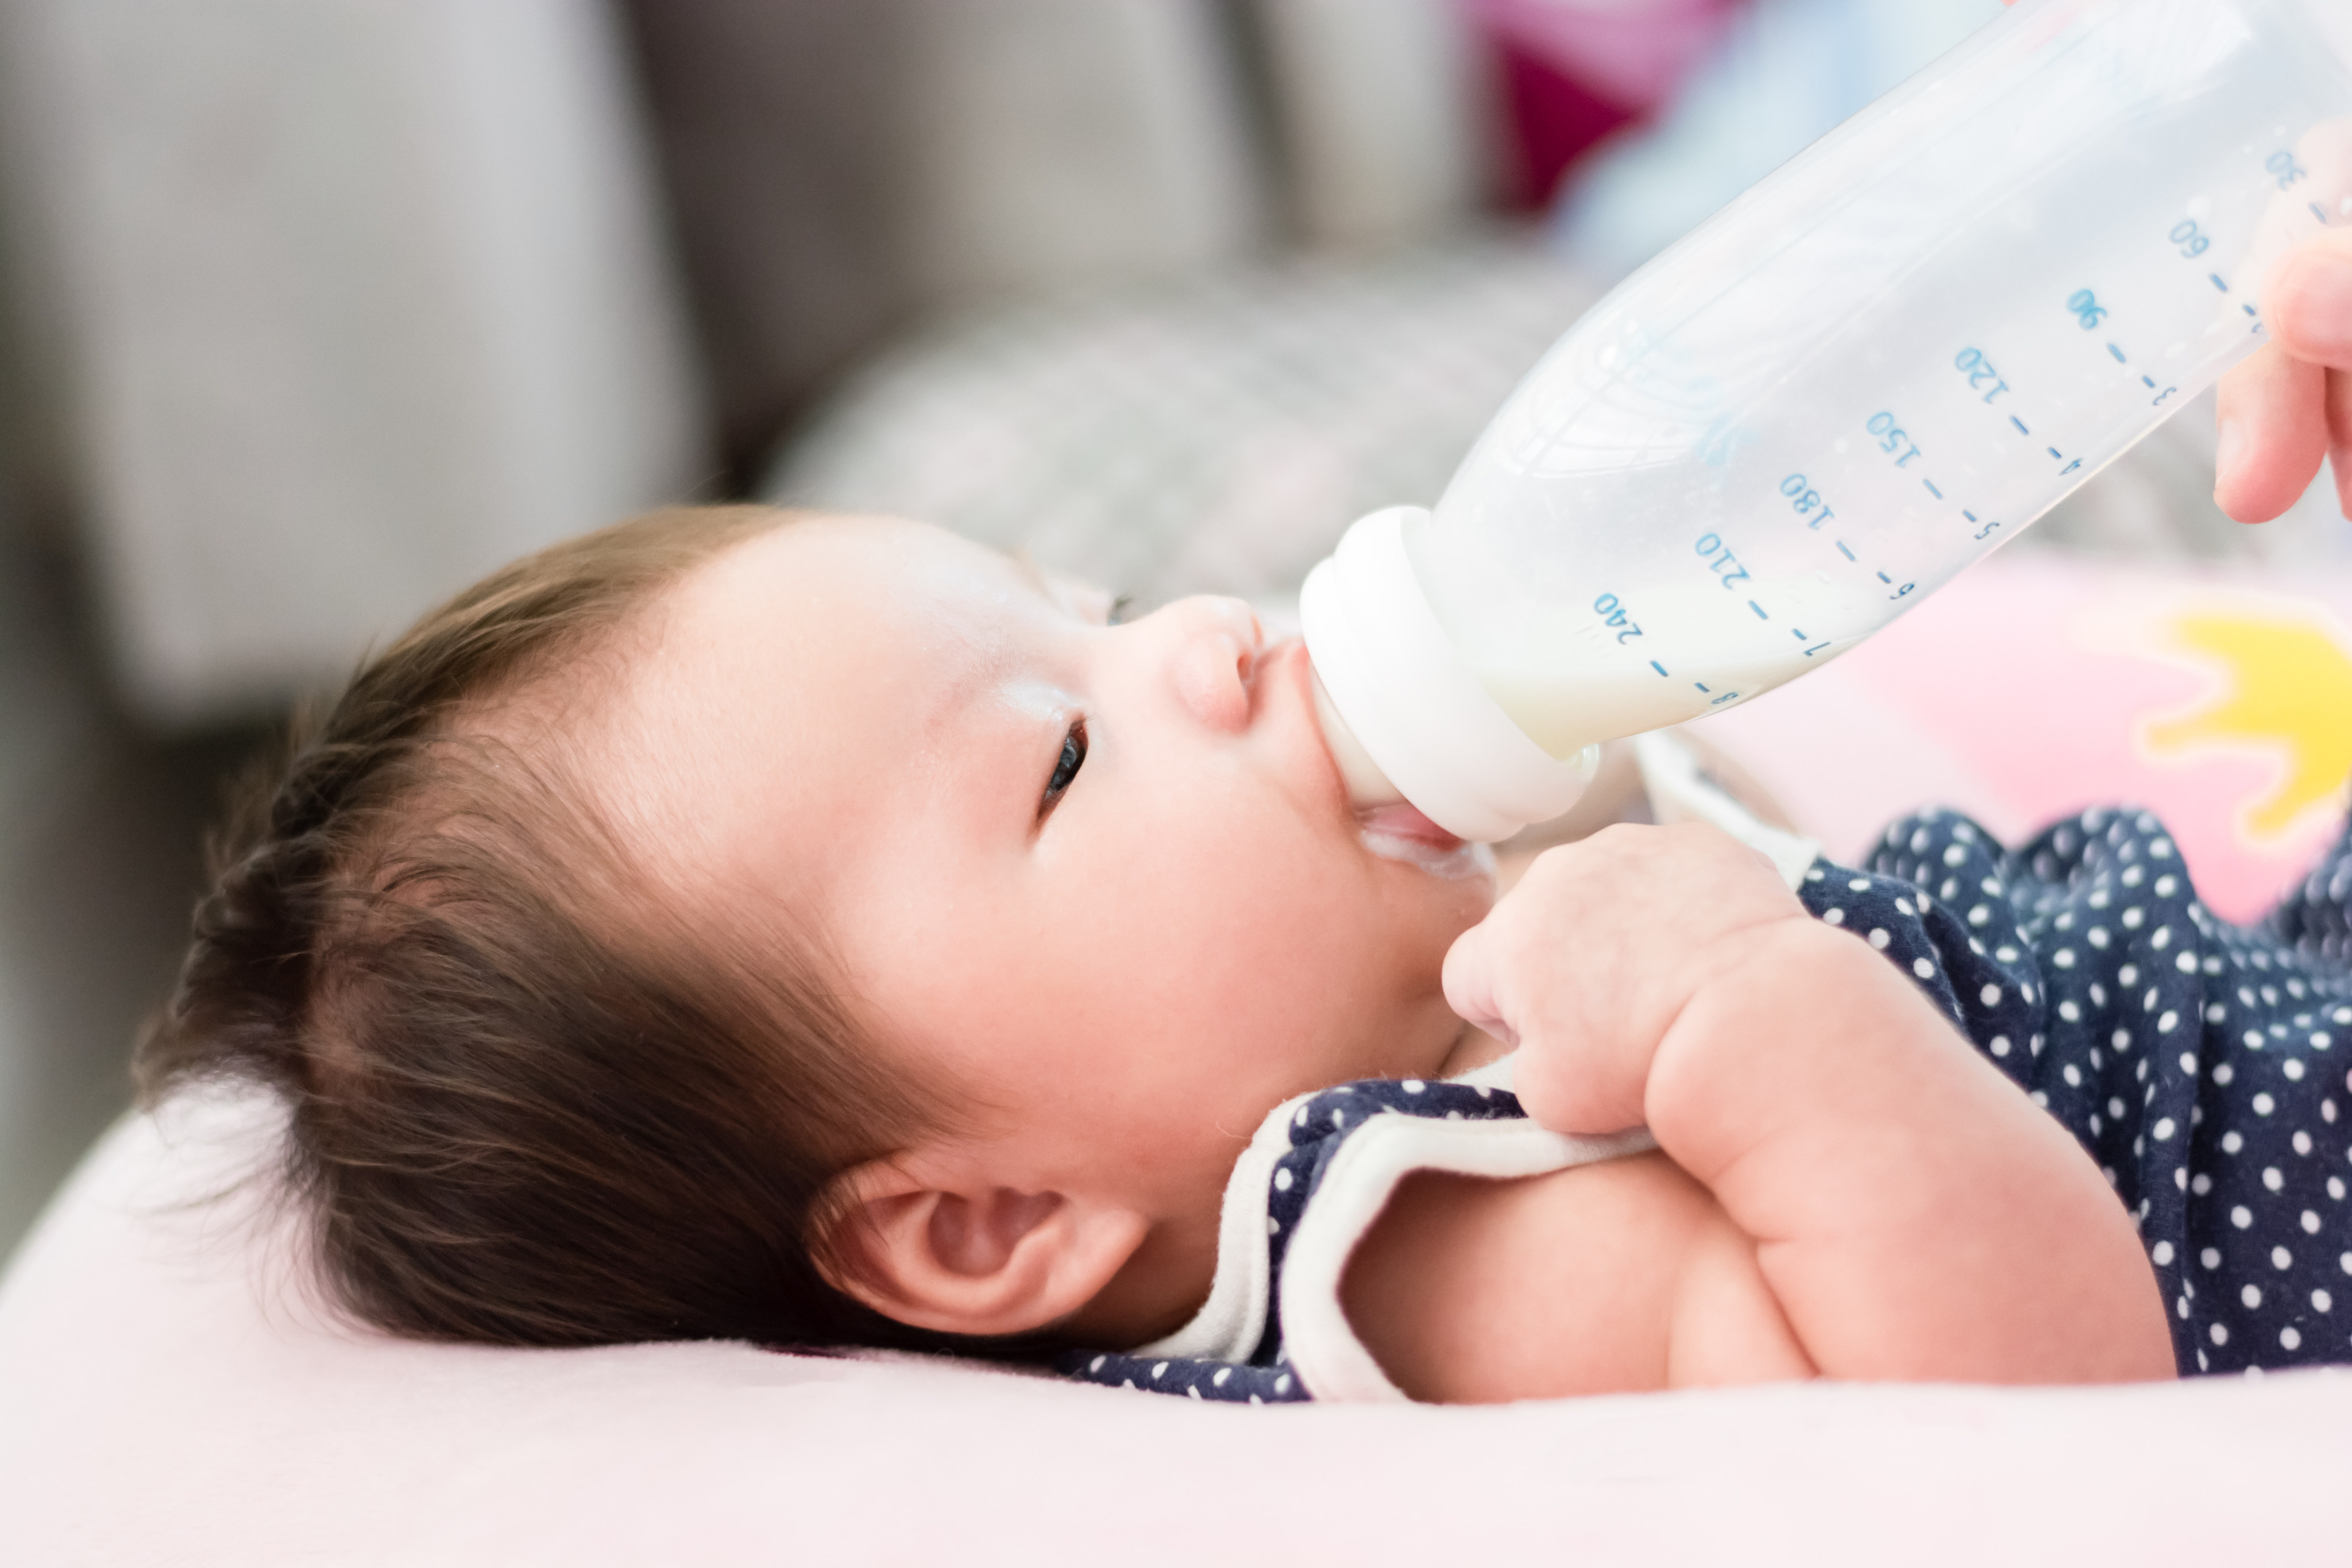 A first air shipment of baby milk formula will be delivered to the US on Sunday under an emergency programme. Photo: Shutterstock